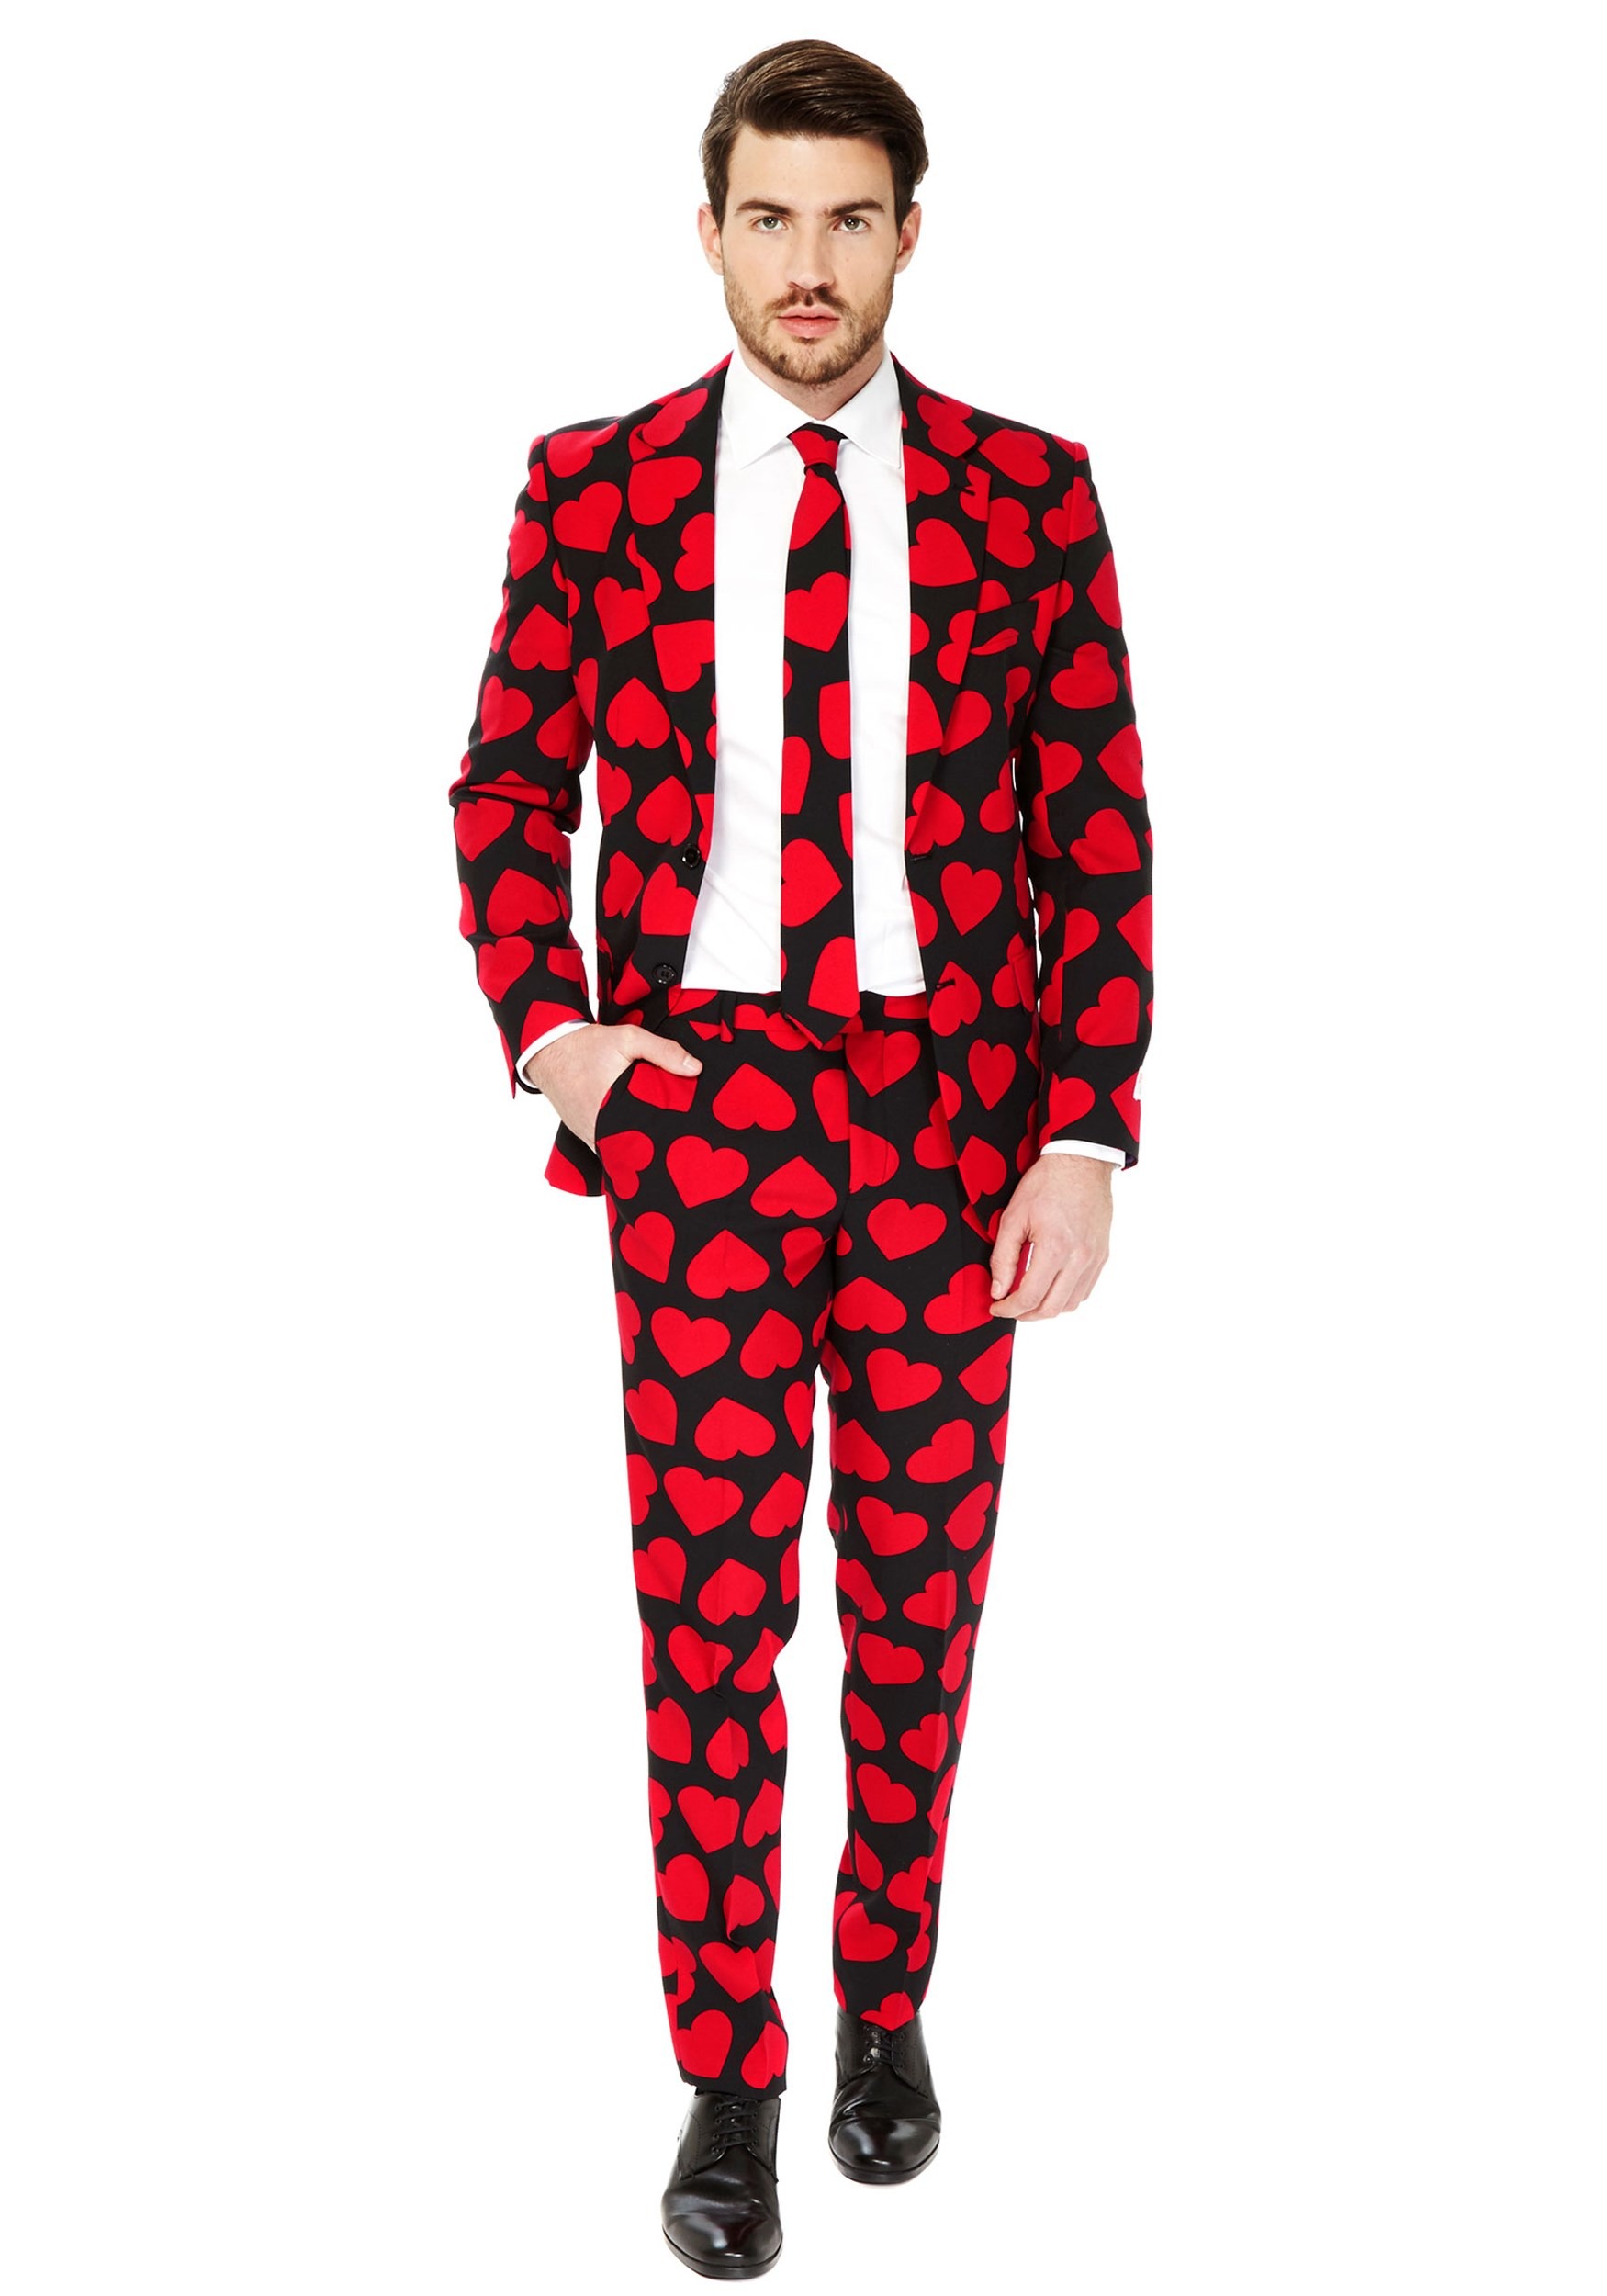 Opposuit King Of Hearts Suit for Men -  Opposuits